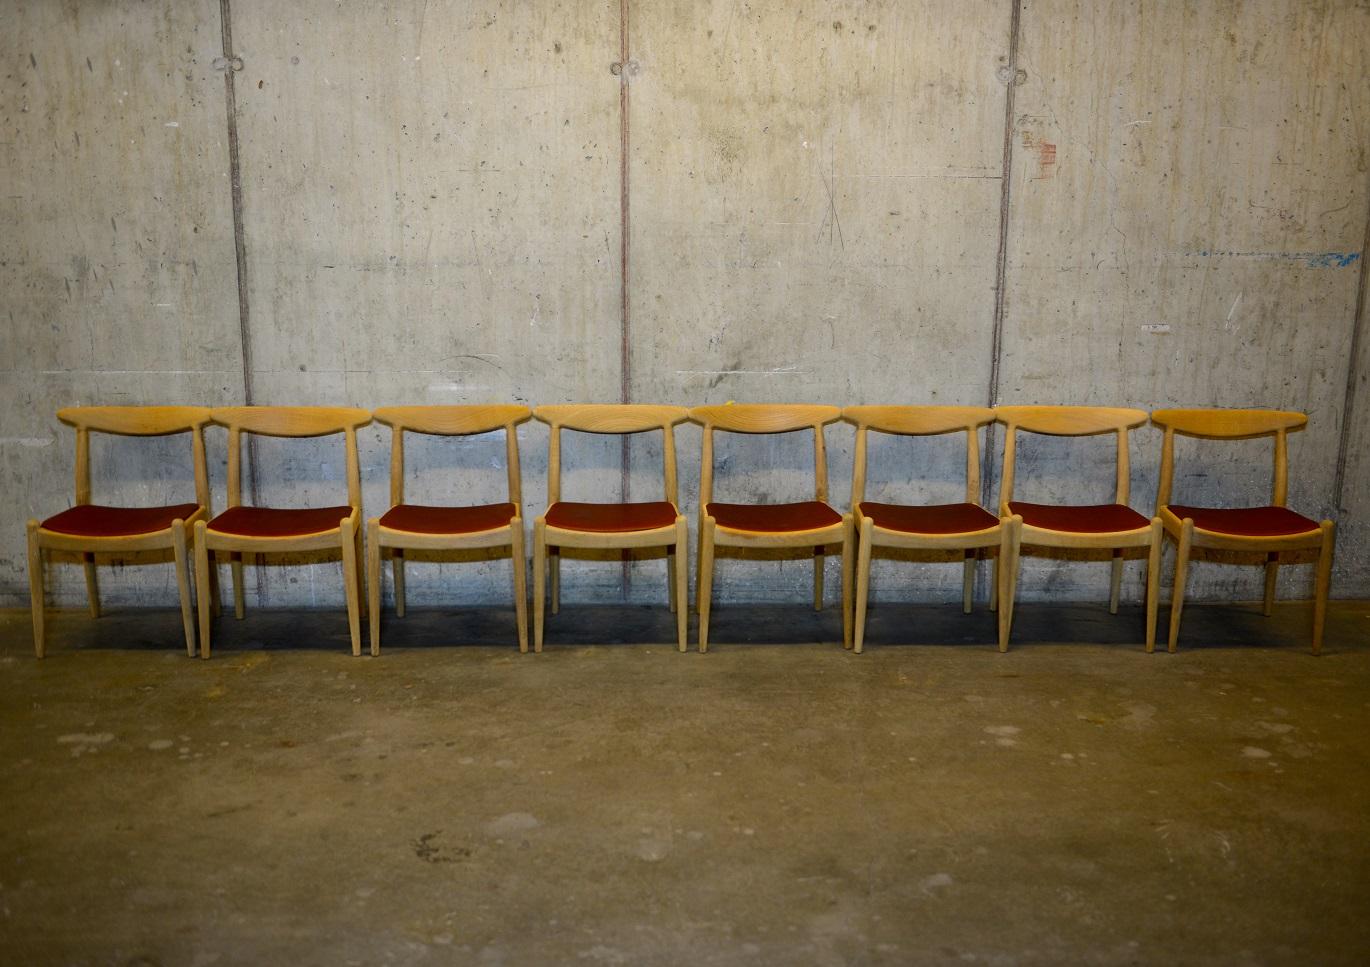 Danish Set of 8 W1 Oak and Leather Chairs by Hans J. Wegner, 1950s, C.M. Madsens DK For Sale